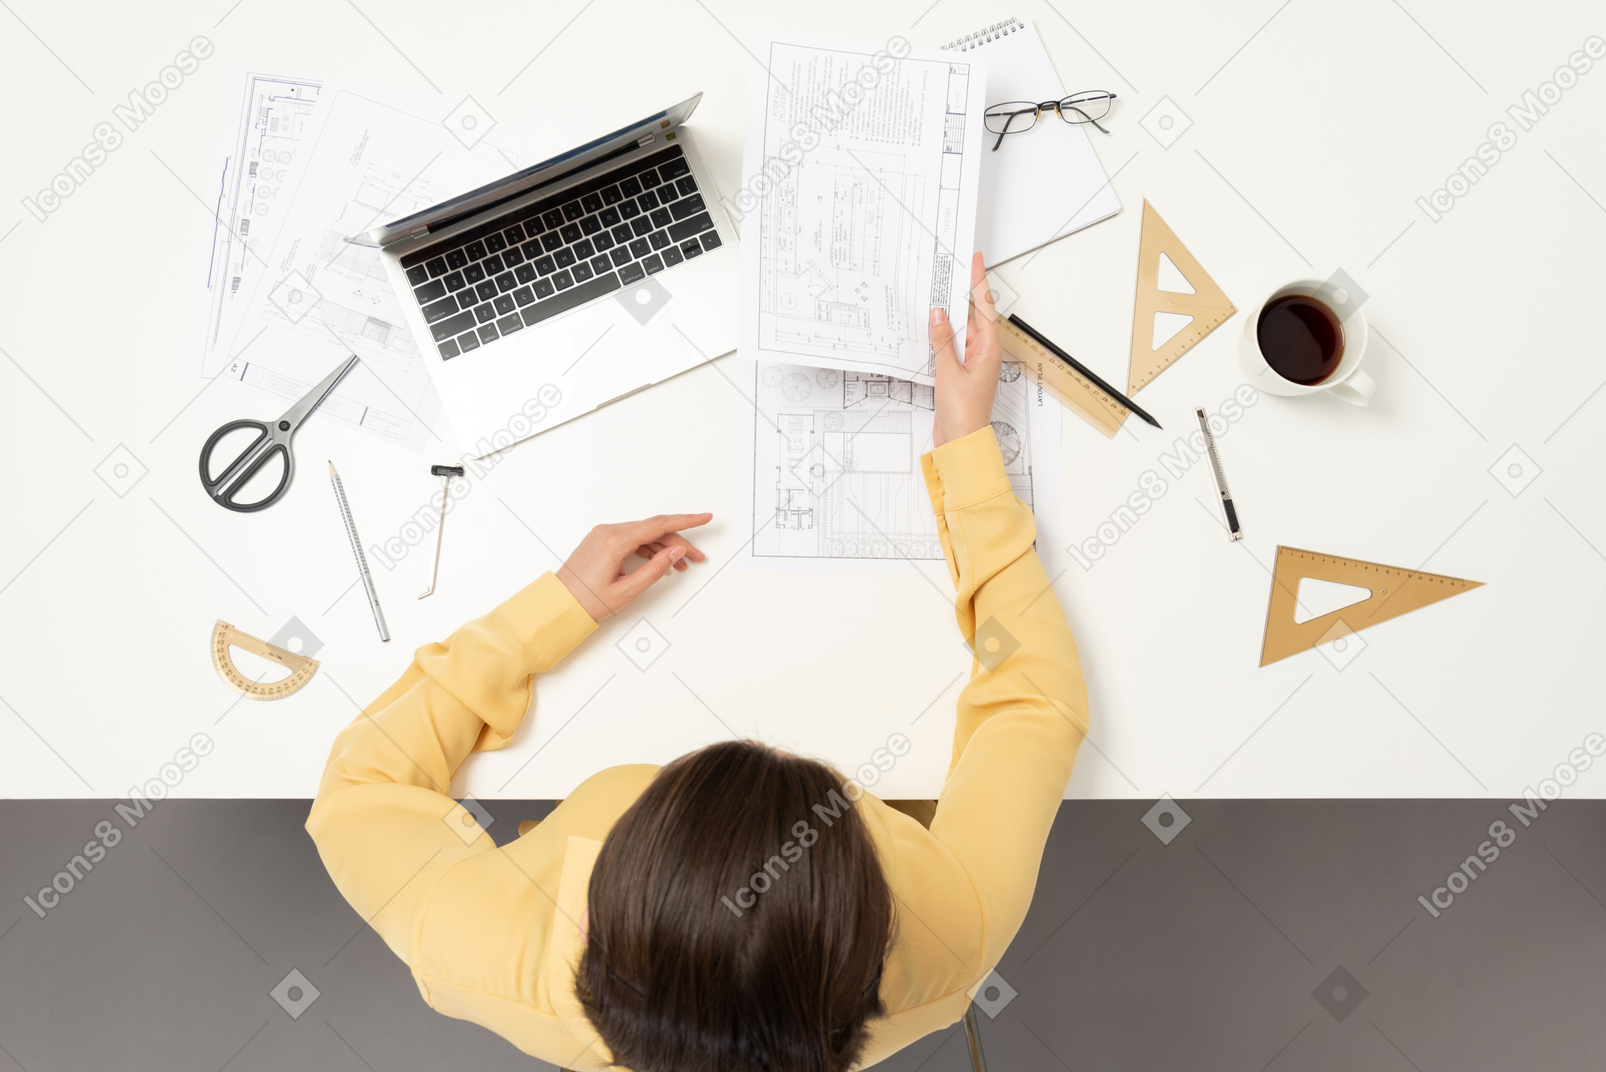 A female architect passing an architectural drawing